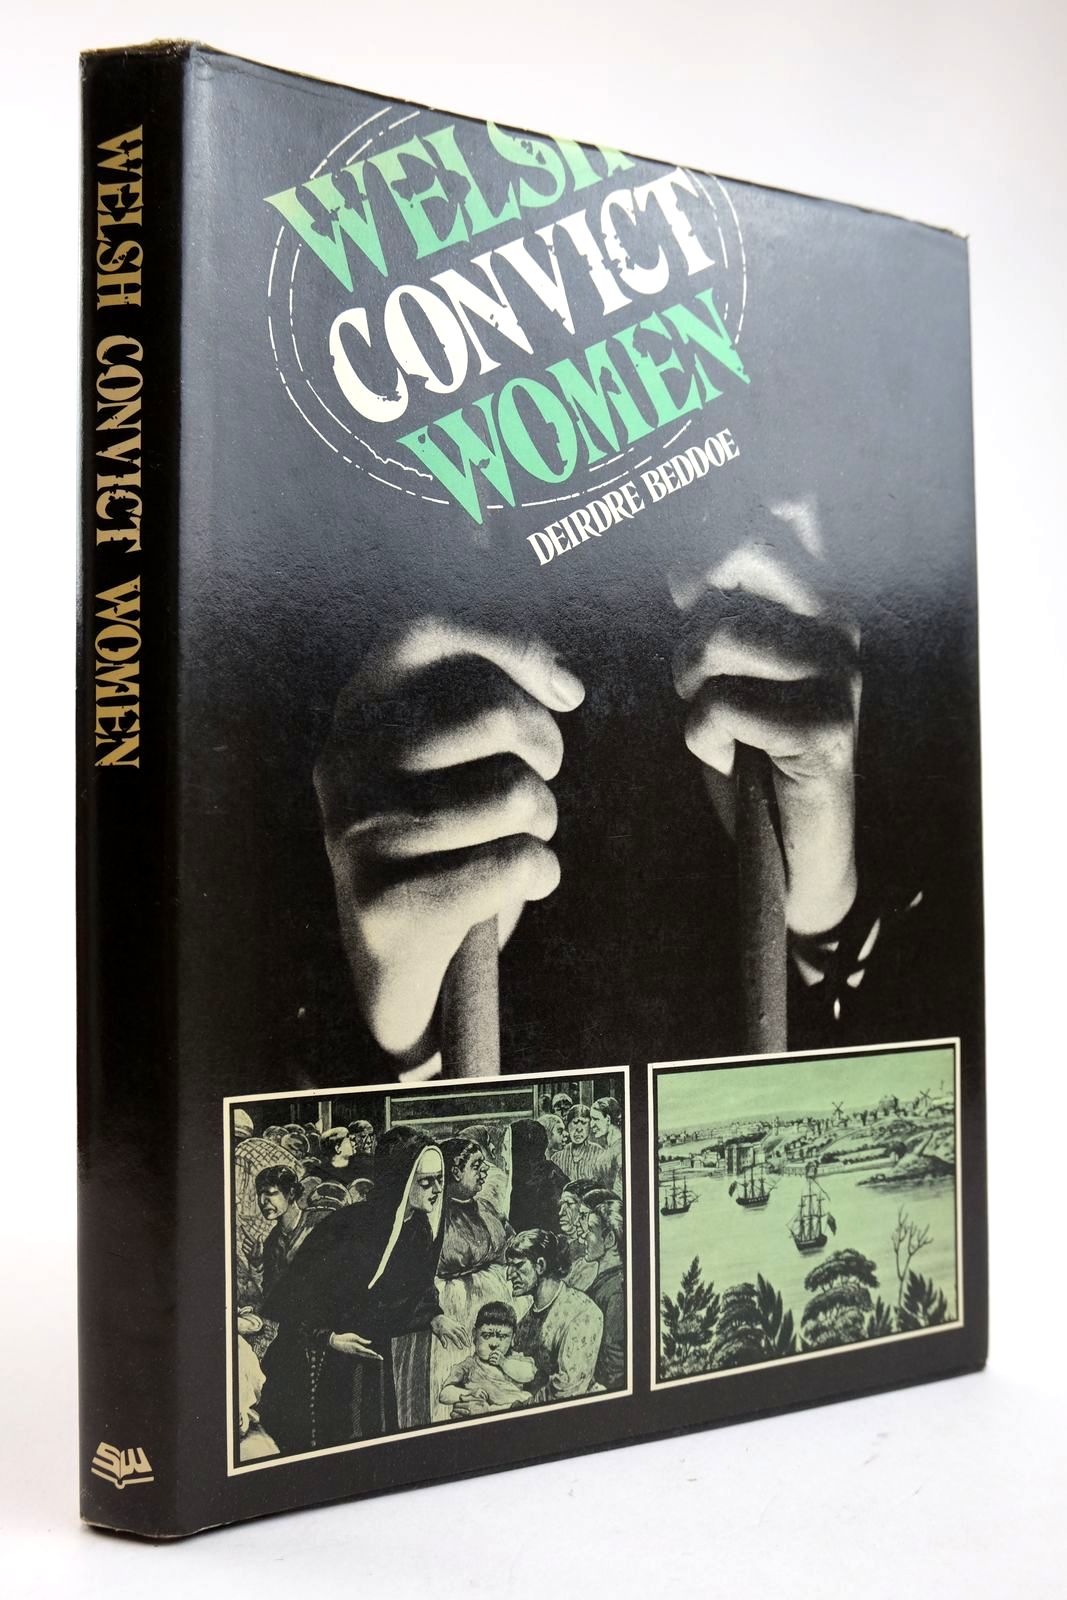 Photo of WELSH CONVICT WOMEN written by Beddoe, Deirdre published by Stewart Williams (STOCK CODE: 2132871)  for sale by Stella & Rose's Books